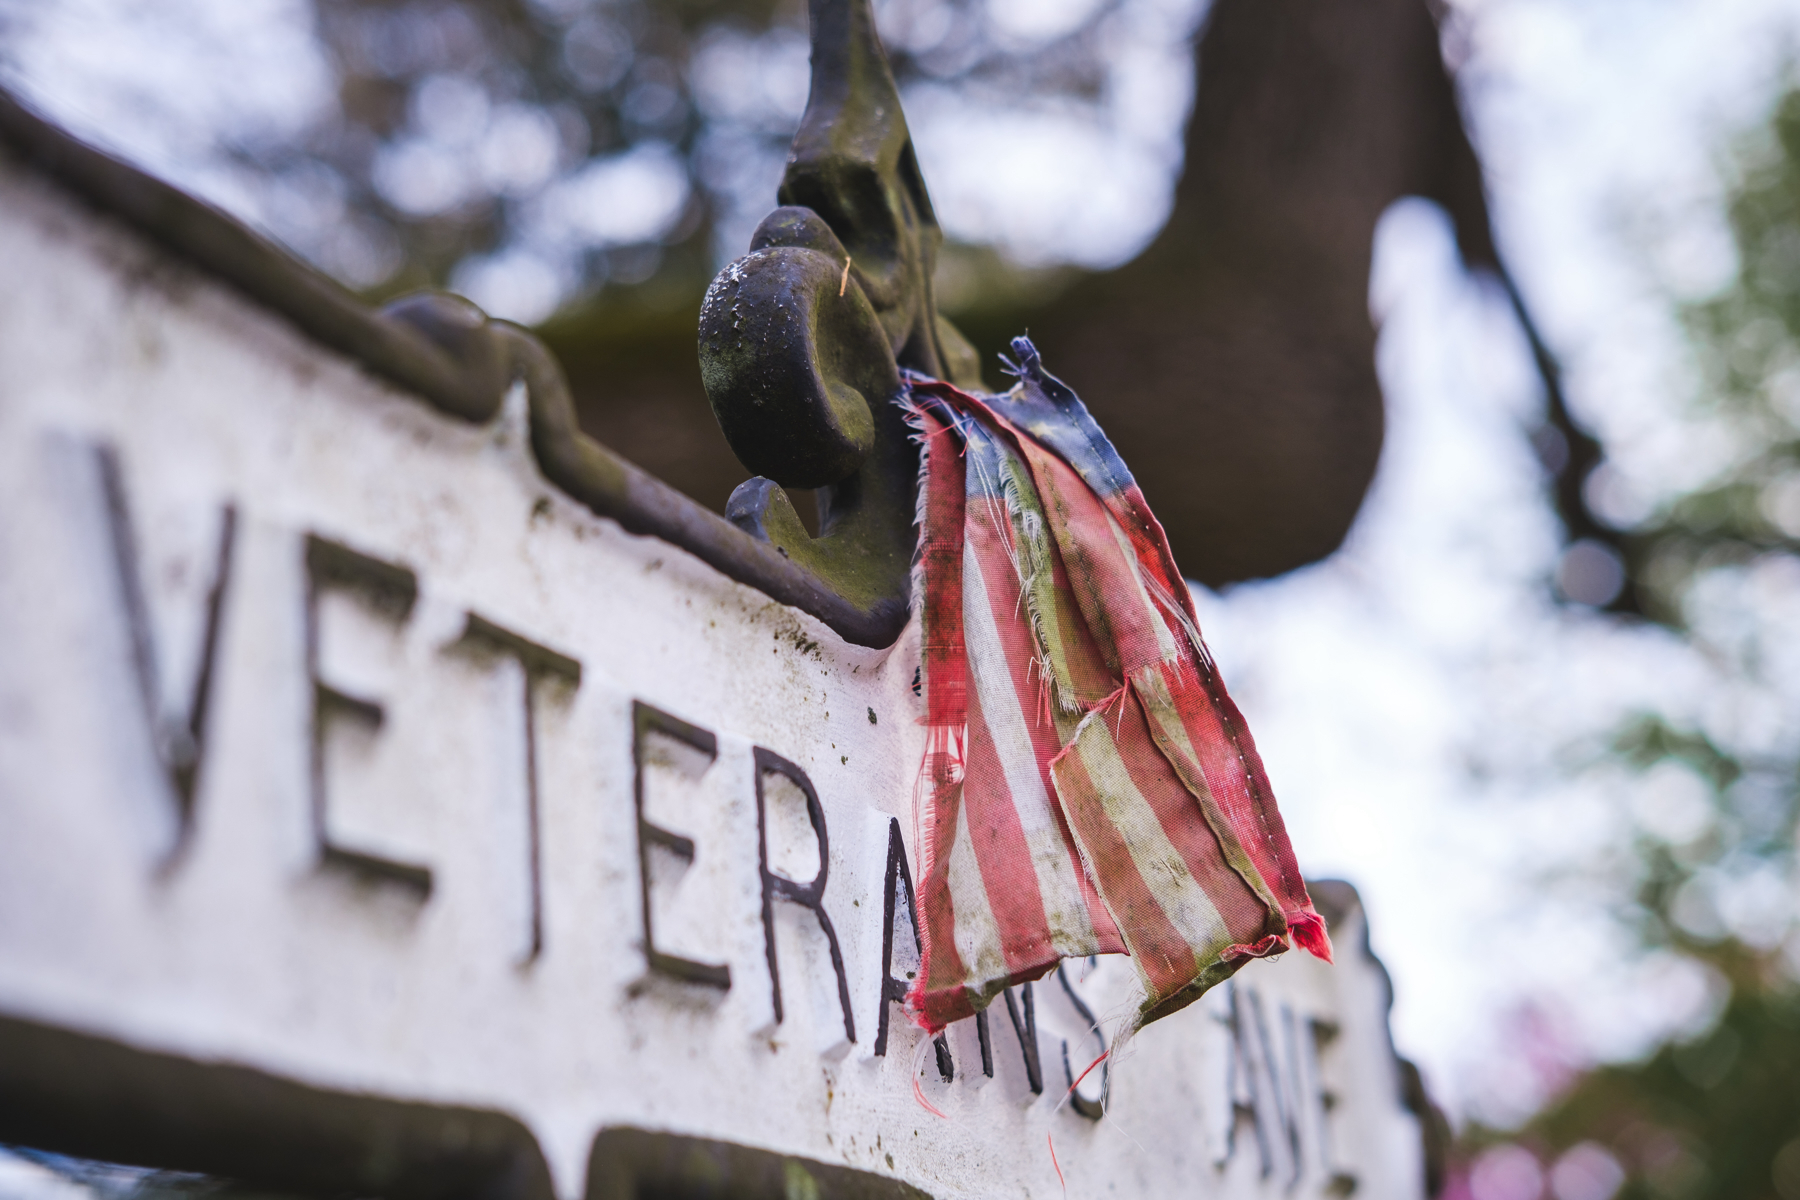 A small, worn, tattered American flag hanging on a street sign that reads ‘VETERANS’.